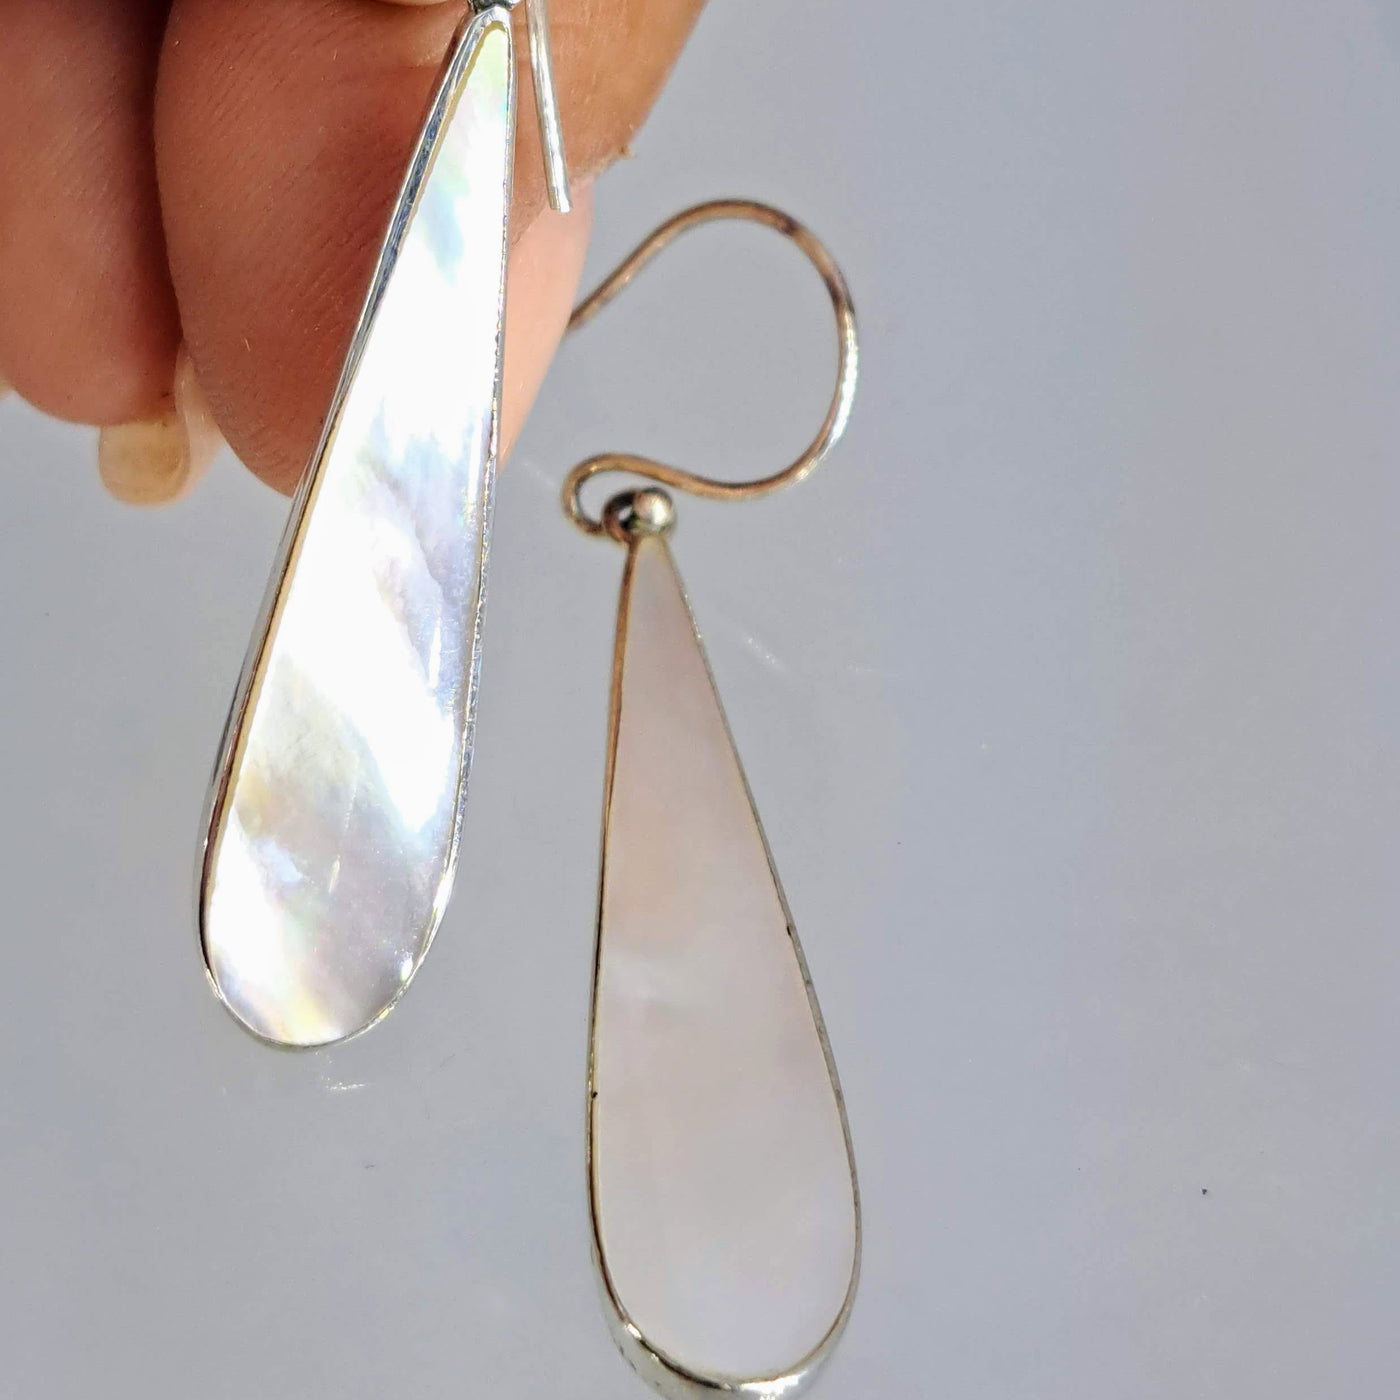 "Exclamation #2!" 2" Earrings - Mother Of Pearl, Sterling